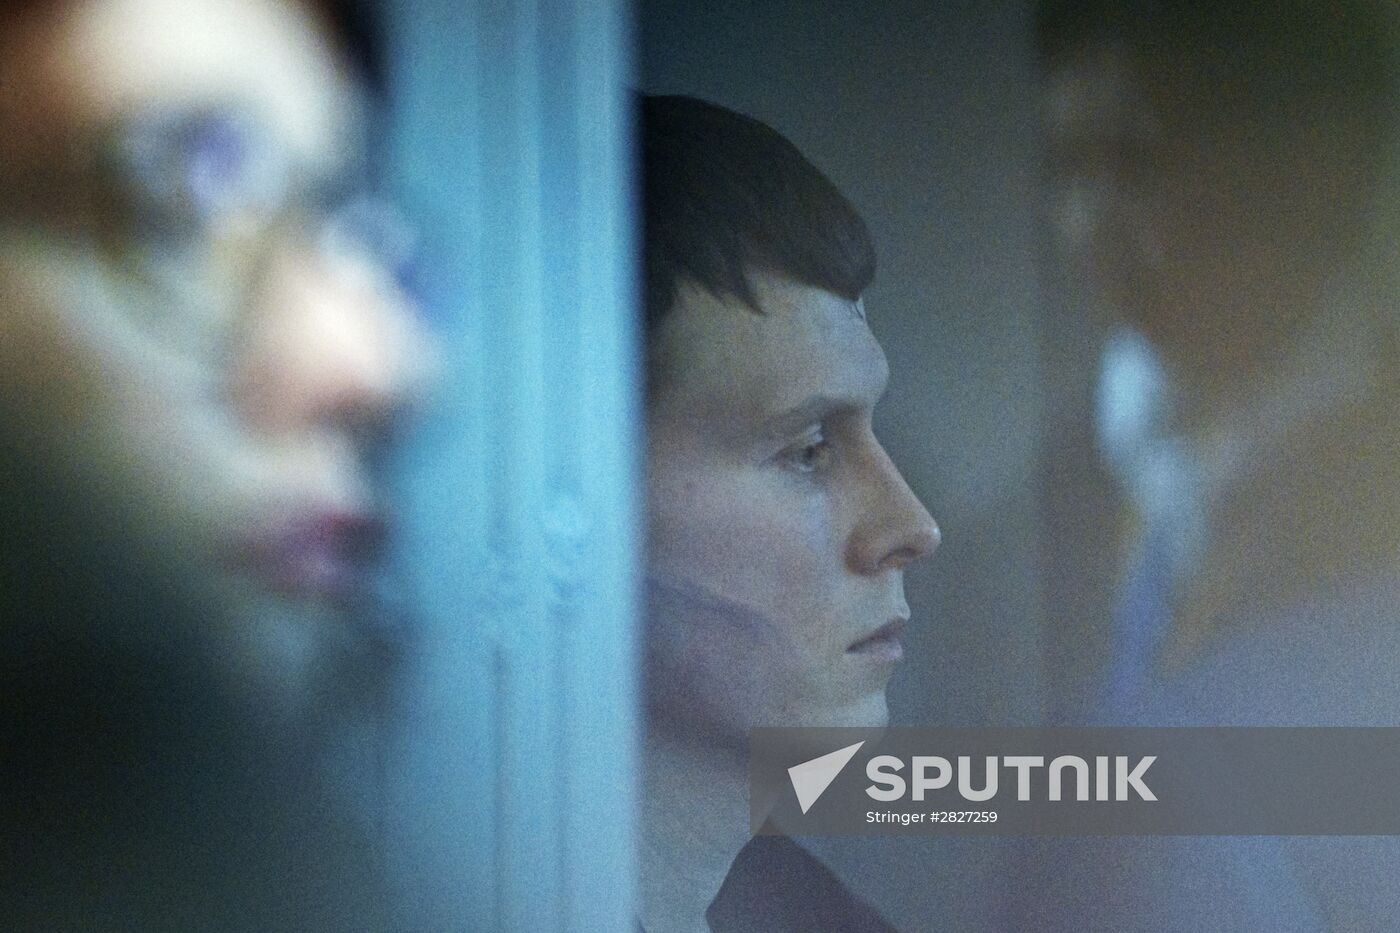 Sentence pronouncement at trial of Yevgeny Yerofeev and Alexander Alexandrov in Kiev